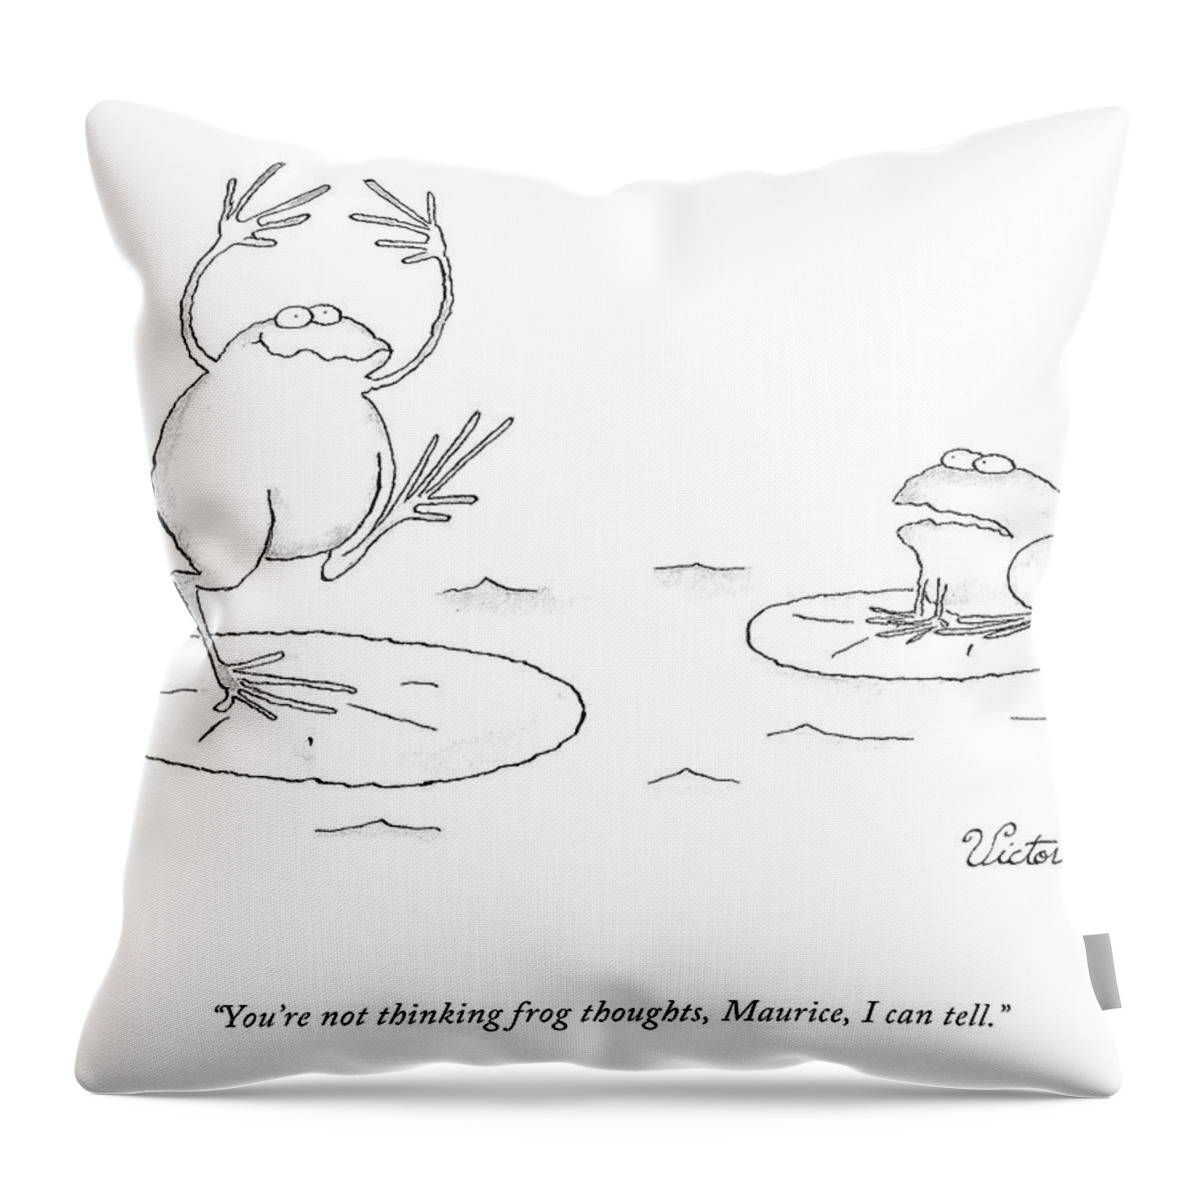 Thinking Frog Thoughts Throw Pillow